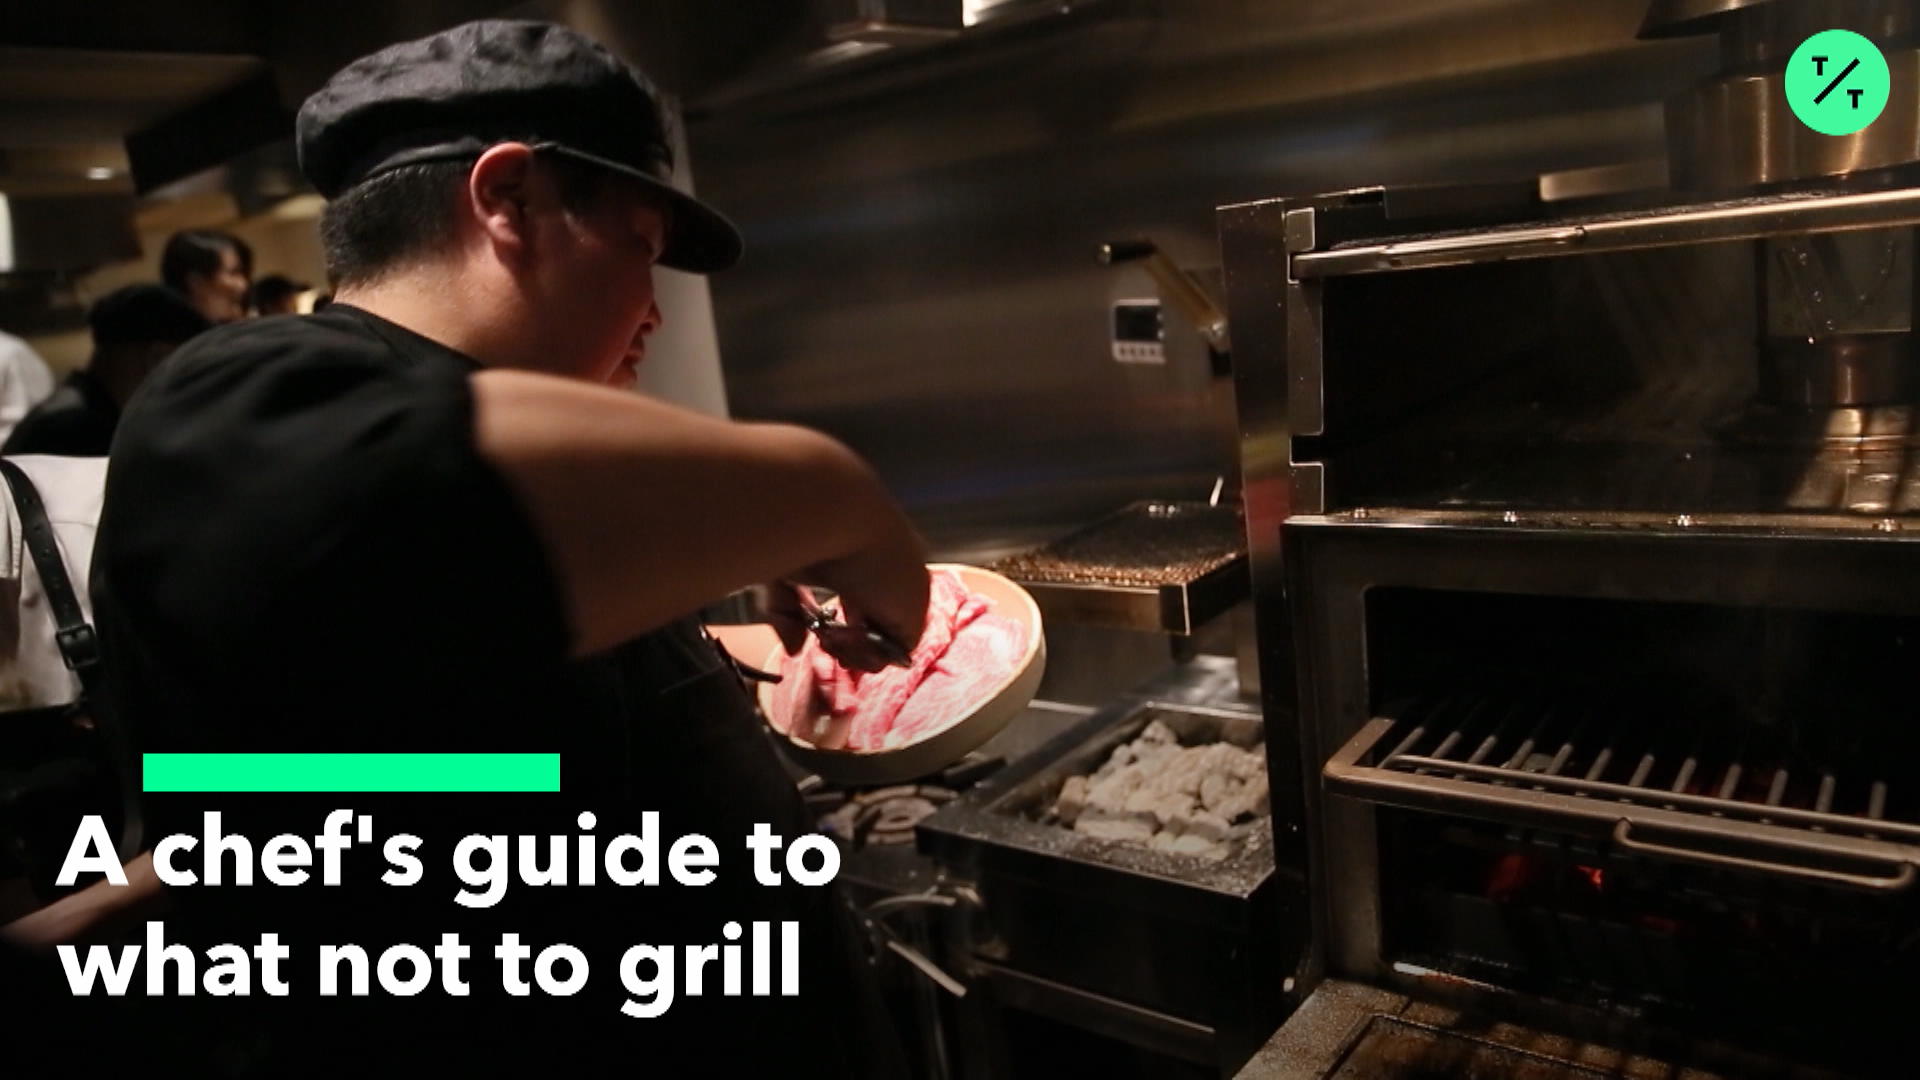 How to grill the perfect burger: What meat experts, chefs say